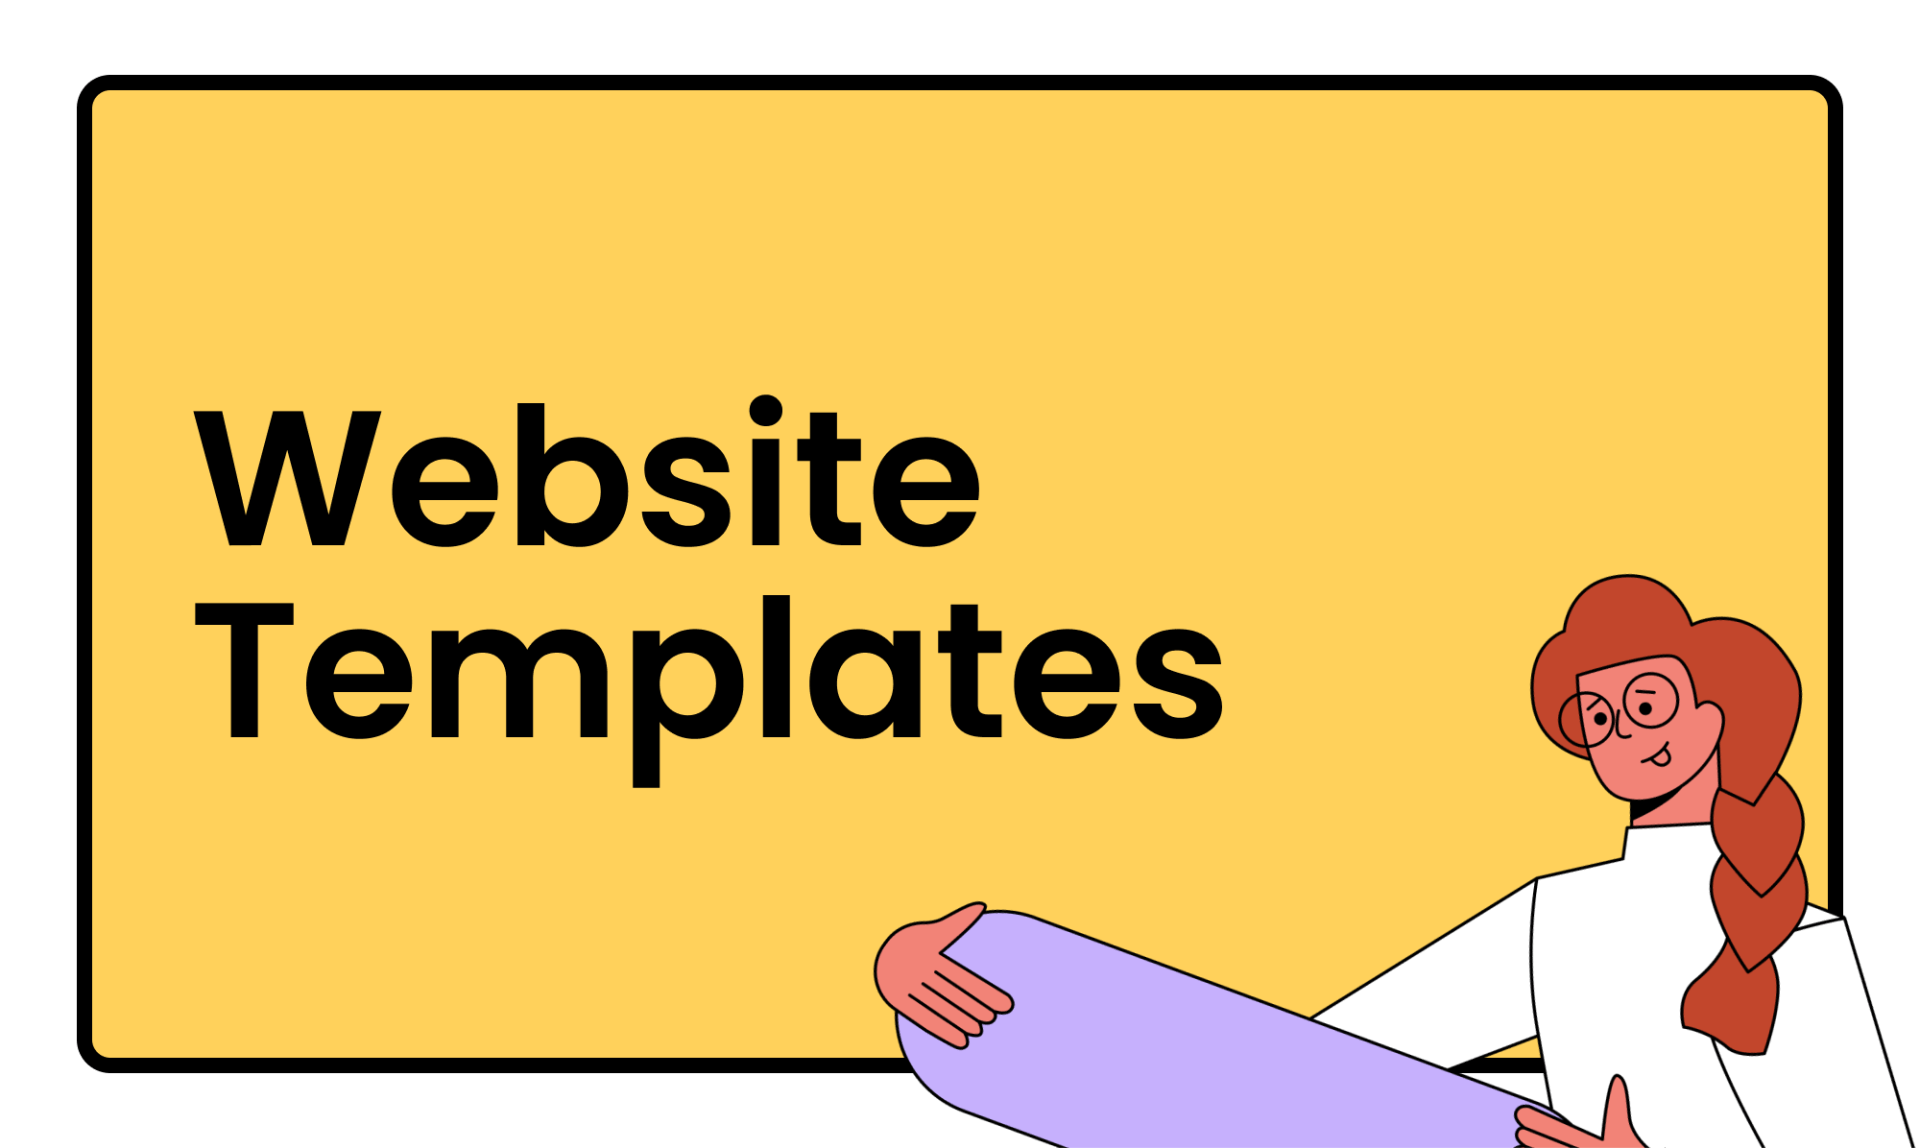 Building a website using a template is like building a house from a floorplan.